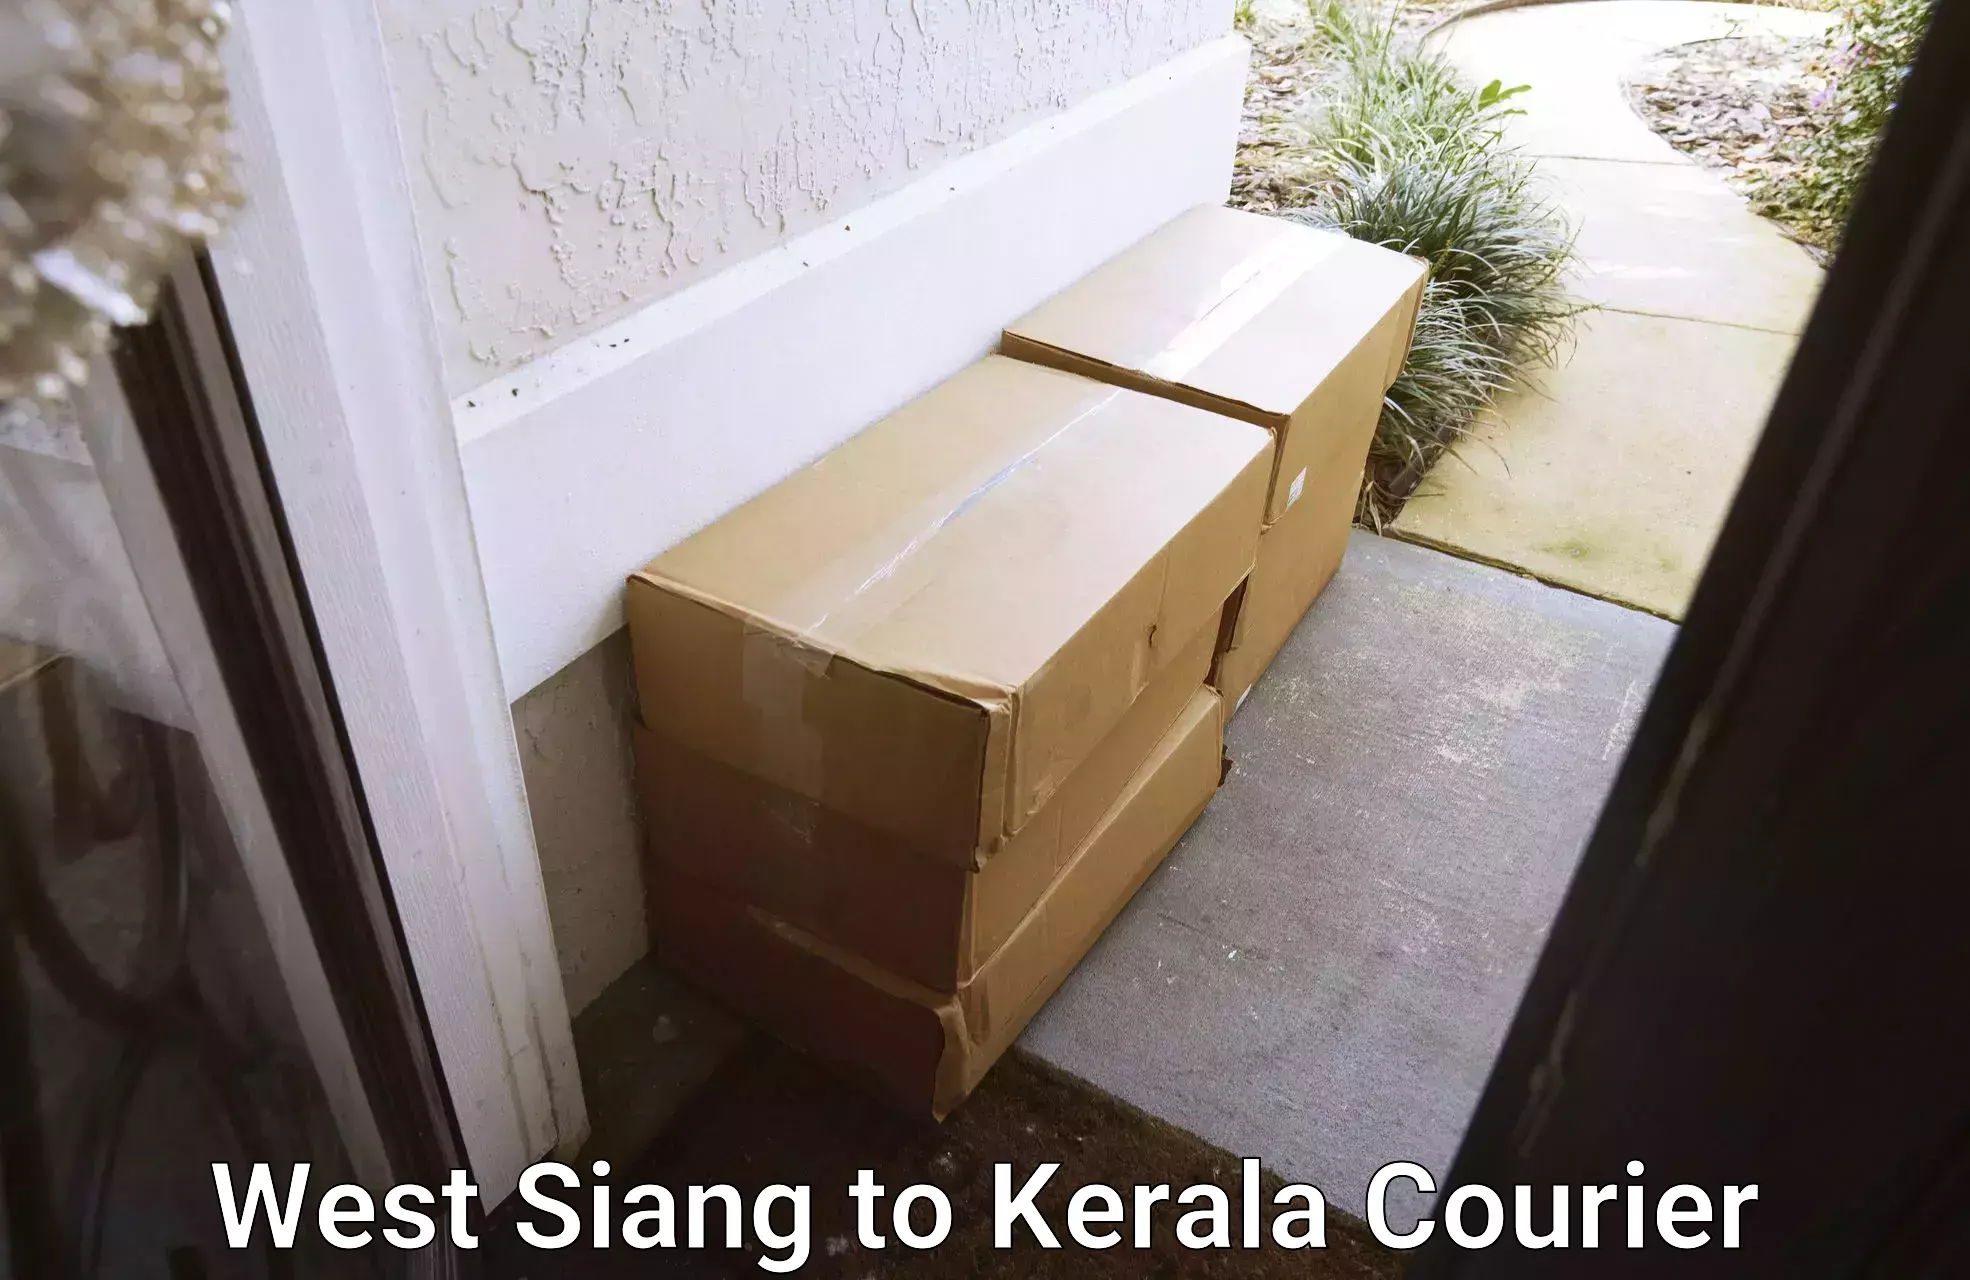 Customizable delivery plans West Siang to Kerala